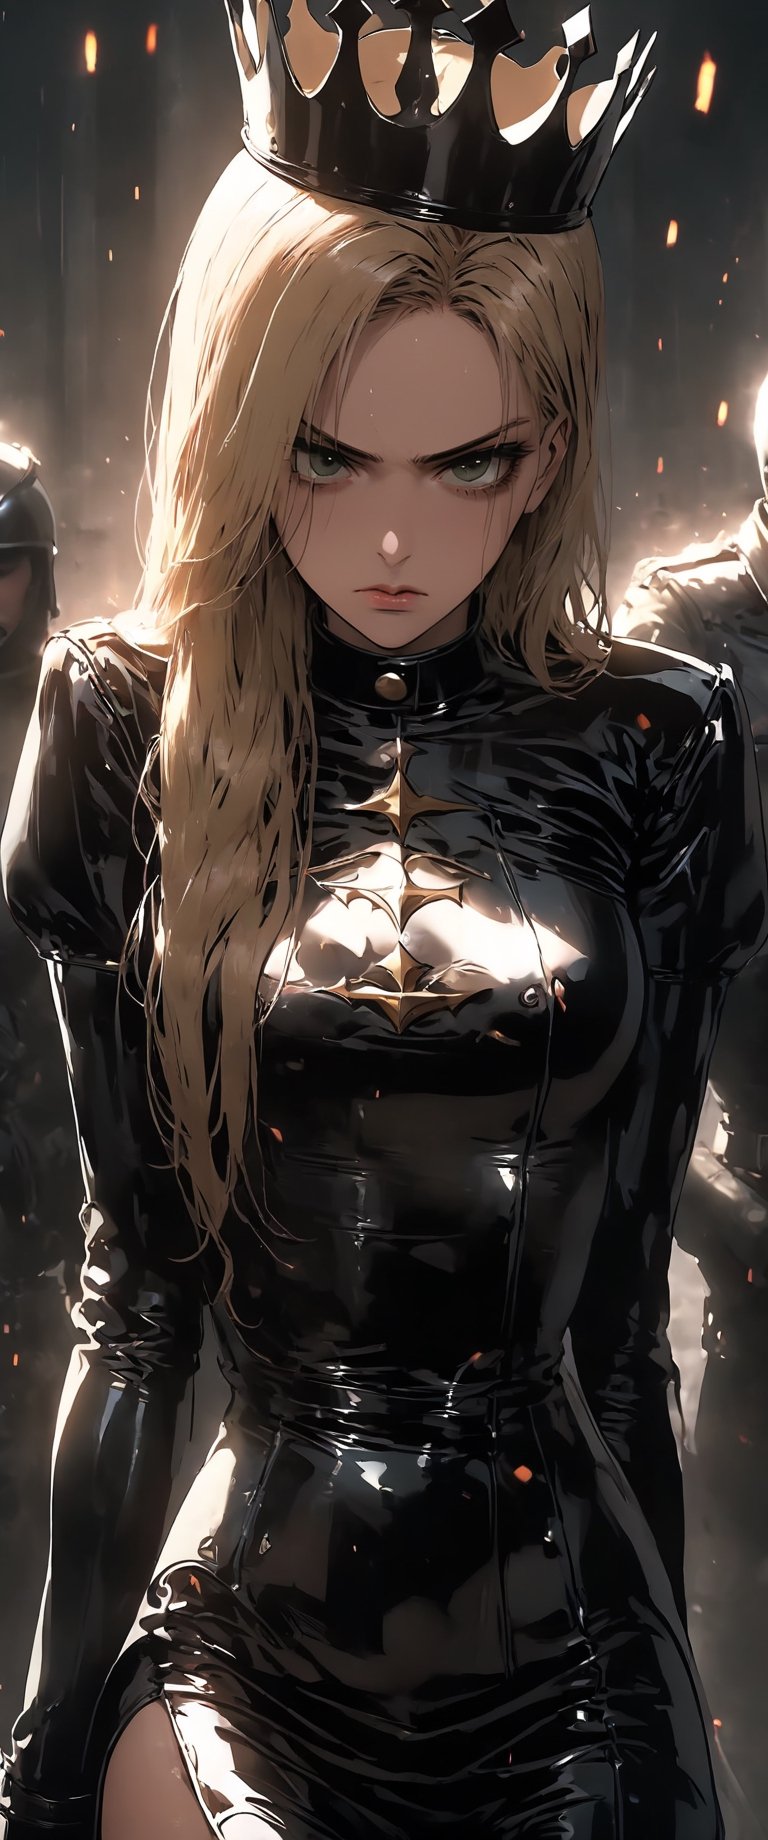 poster of a sexy   [princess, suffering,  burdened by the weight of a crown,  ]  in a  [ ], pissed_off,angry, latex uniform, eye angle view, ,dark anime